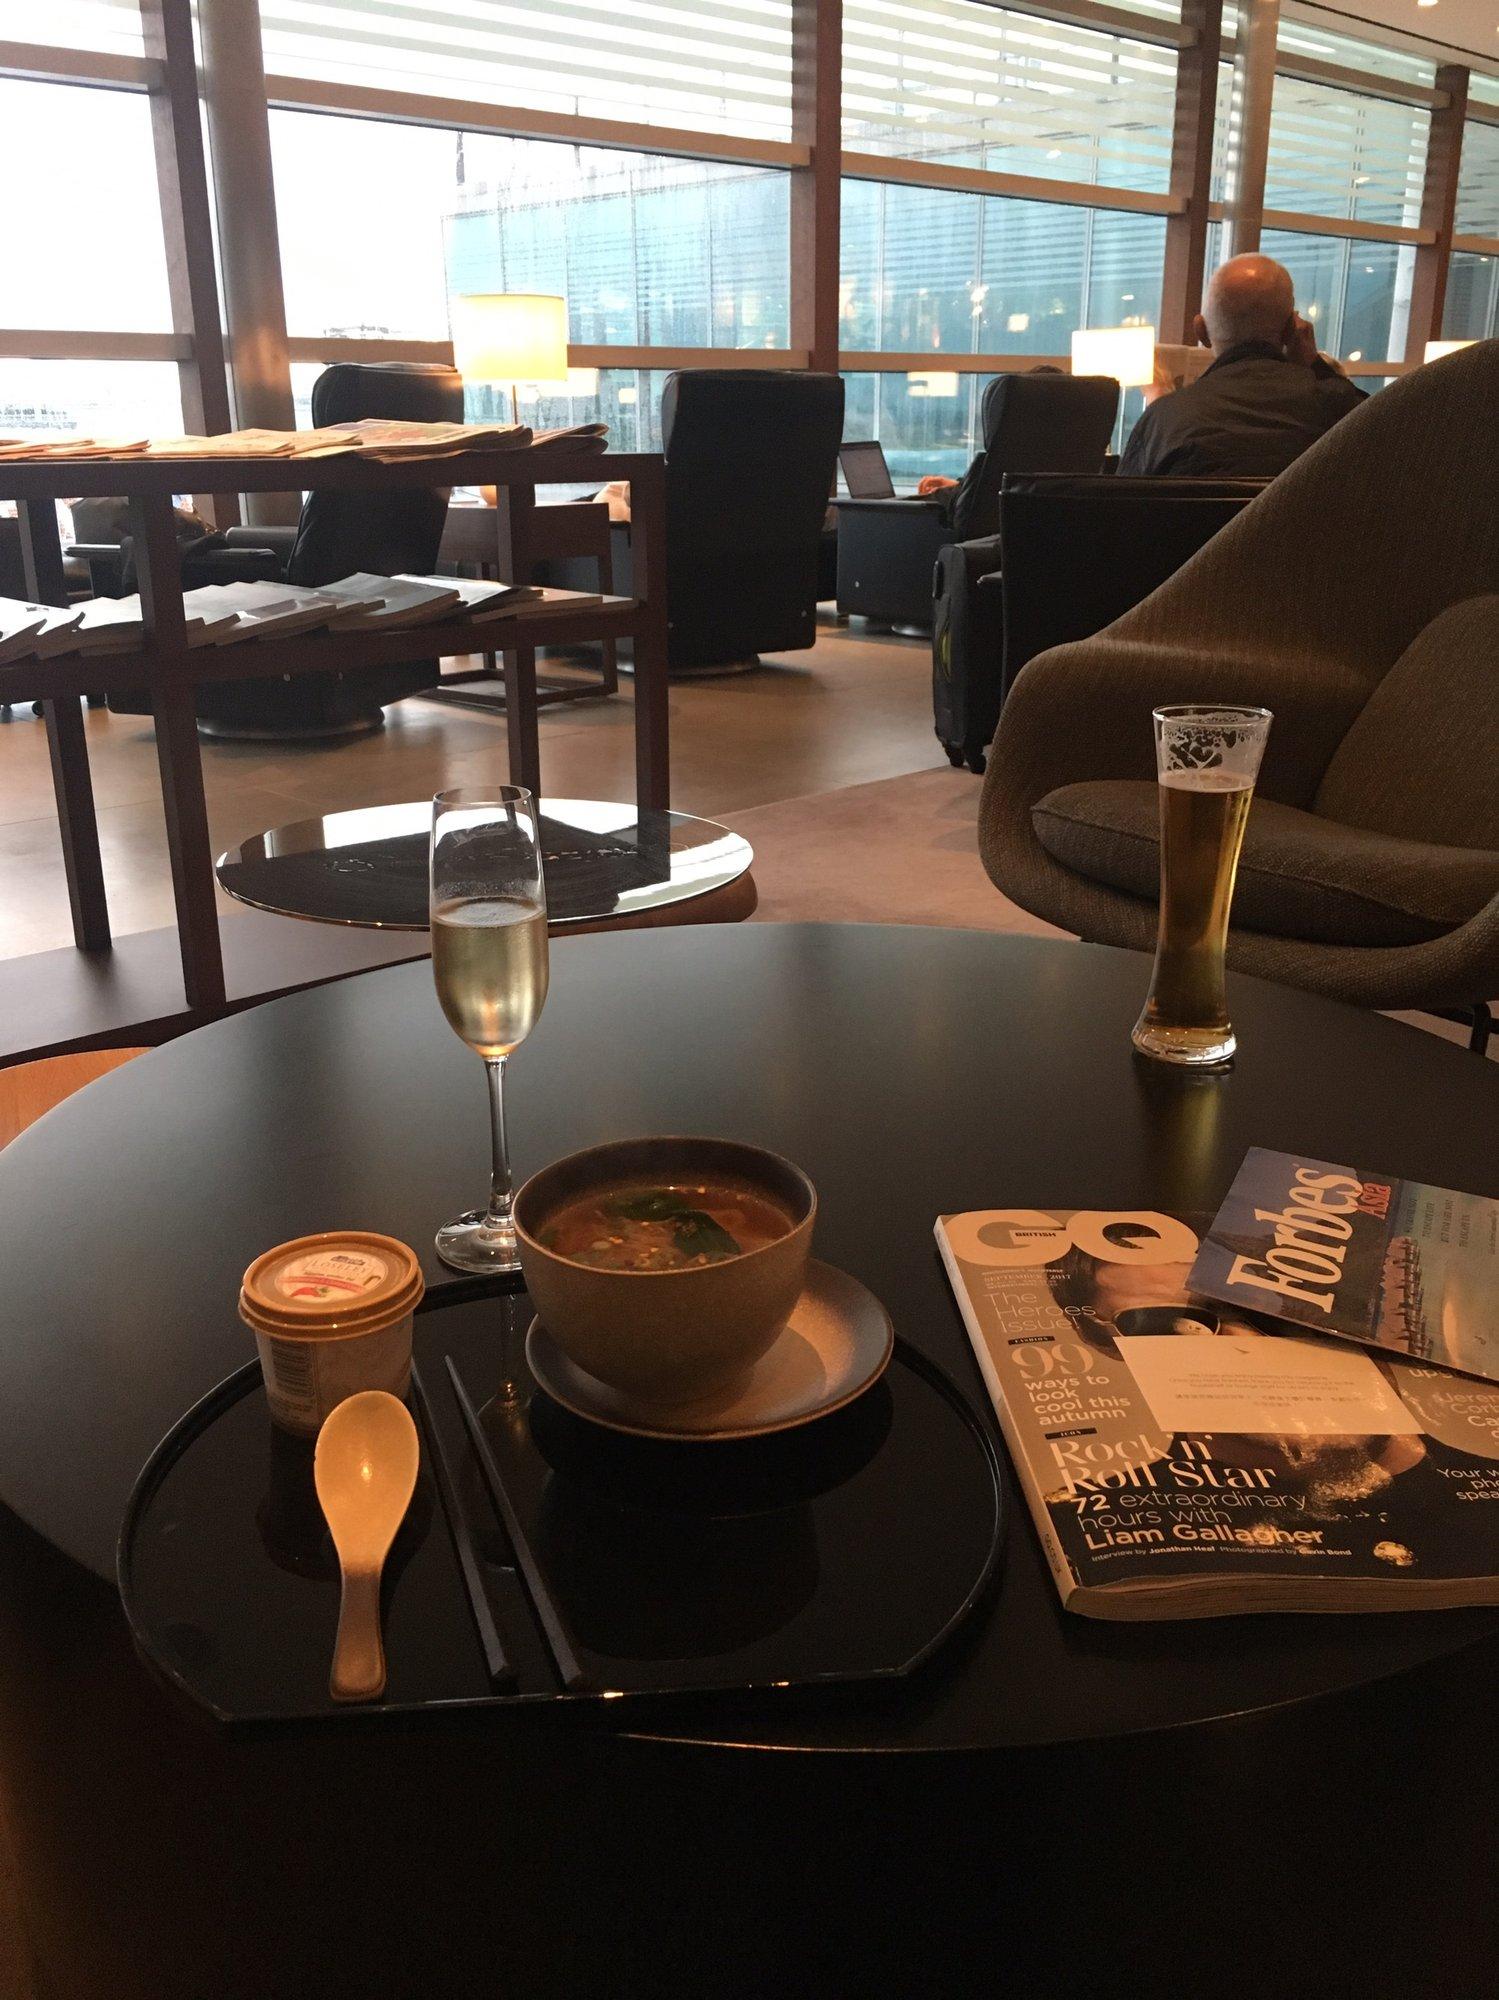 Cathay Pacific Business Class Lounge image 17 of 48